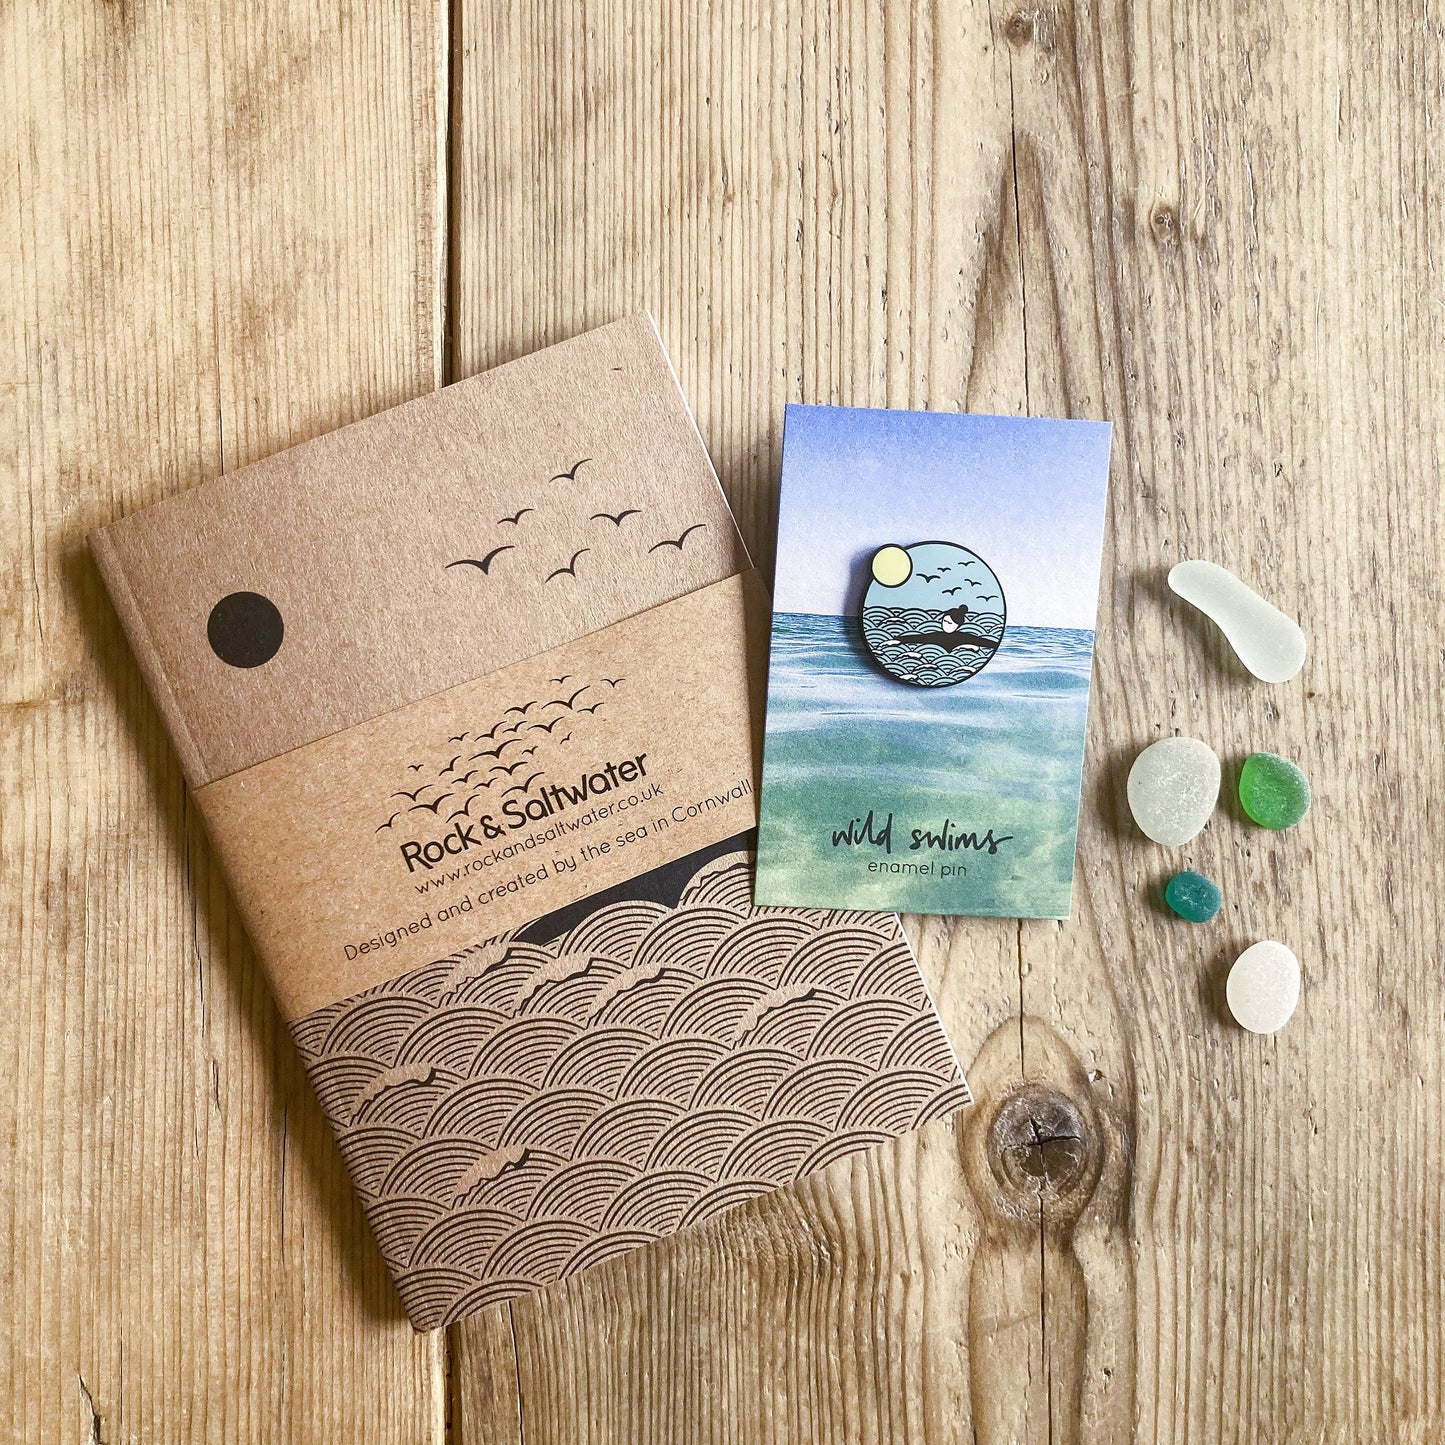 Gift bundle | wild swims enamel pin and A6 notebook